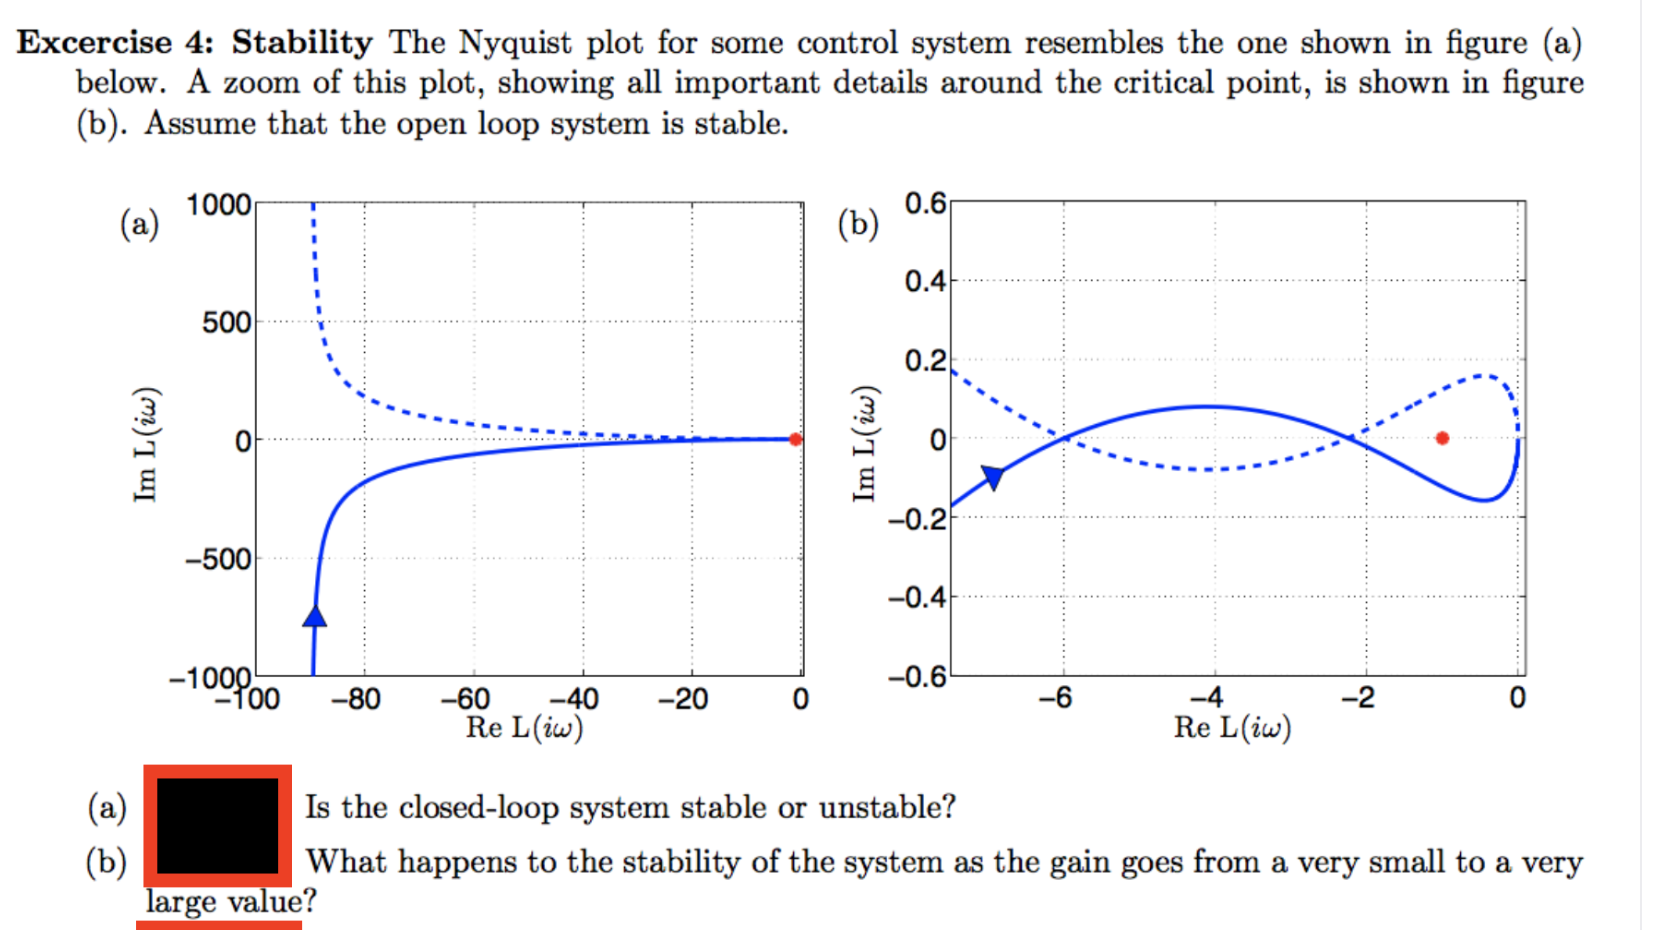 Excercise 4: Stability The Nyquist plot for some control system resembles the one shown in figure (a)
below. A zoom of this plot, showing all important details around the critical point, is shown in figure
(b). Assume that the open loop system is stable.
0.6
1000
(a)
(b)
0.4
500
0.2
-0.2
-500
-0.4
-0.6
-1000
-100
-6
-4
Re L(iw)
-2
-20
-80
-60
-40
Re L(iw)
(a)
Is the closed-loop system stable or unstable?
(b)
large value?
What happens to the stability of the system as the gain goes from a very small to a very
Im L(iw)
Im L(iw)
O
